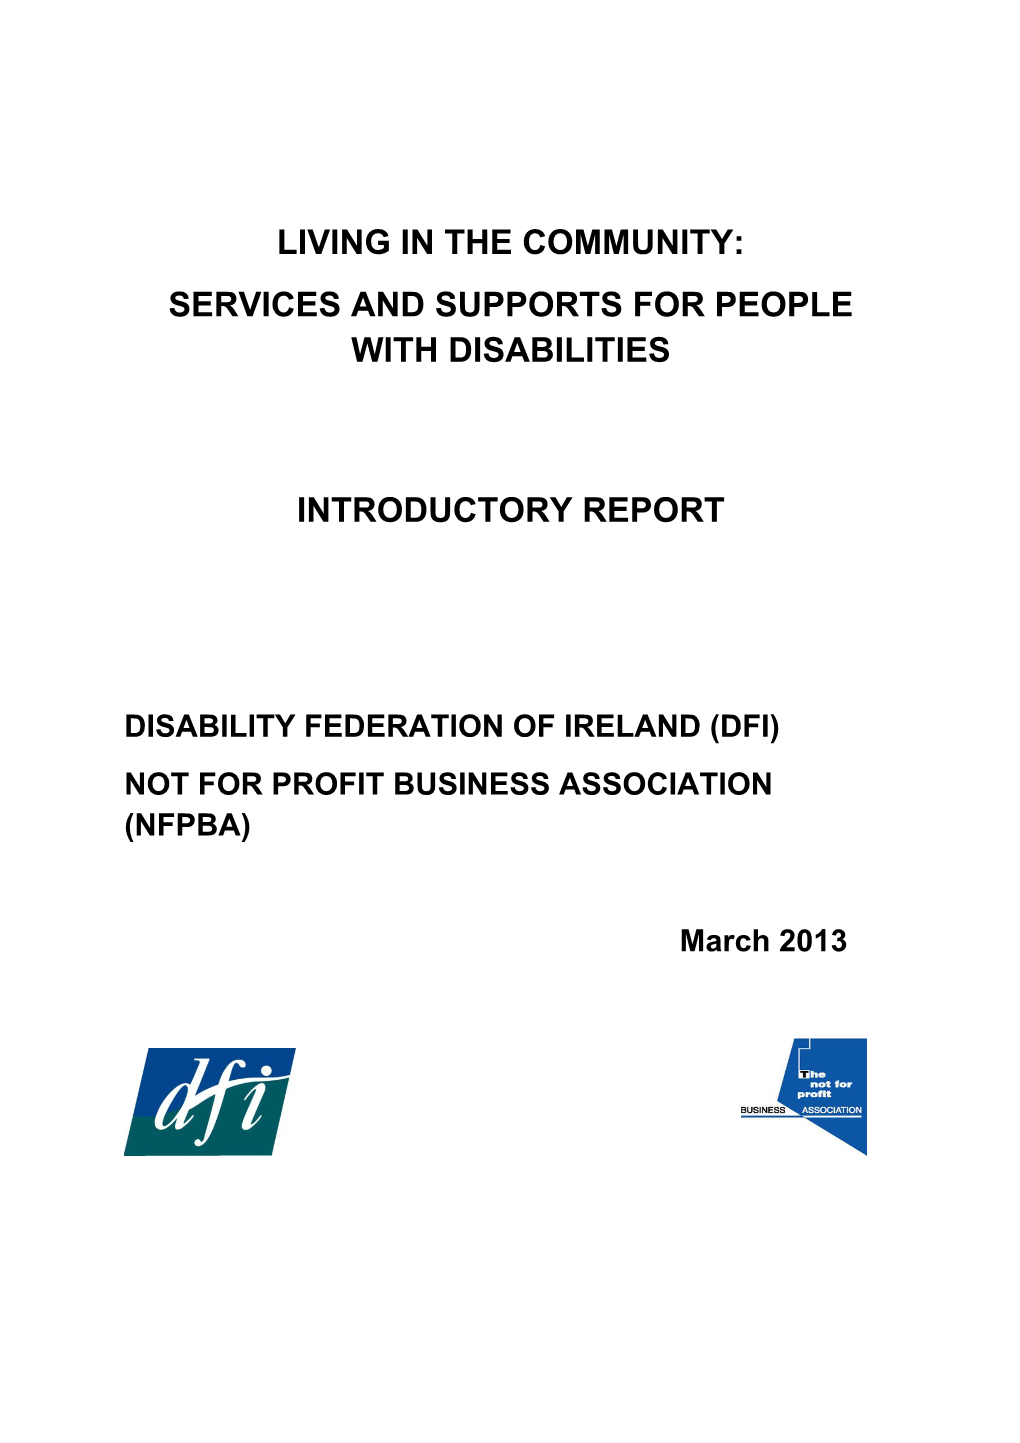 Living in the Community: Services and Supports for Poeople with Disabilities